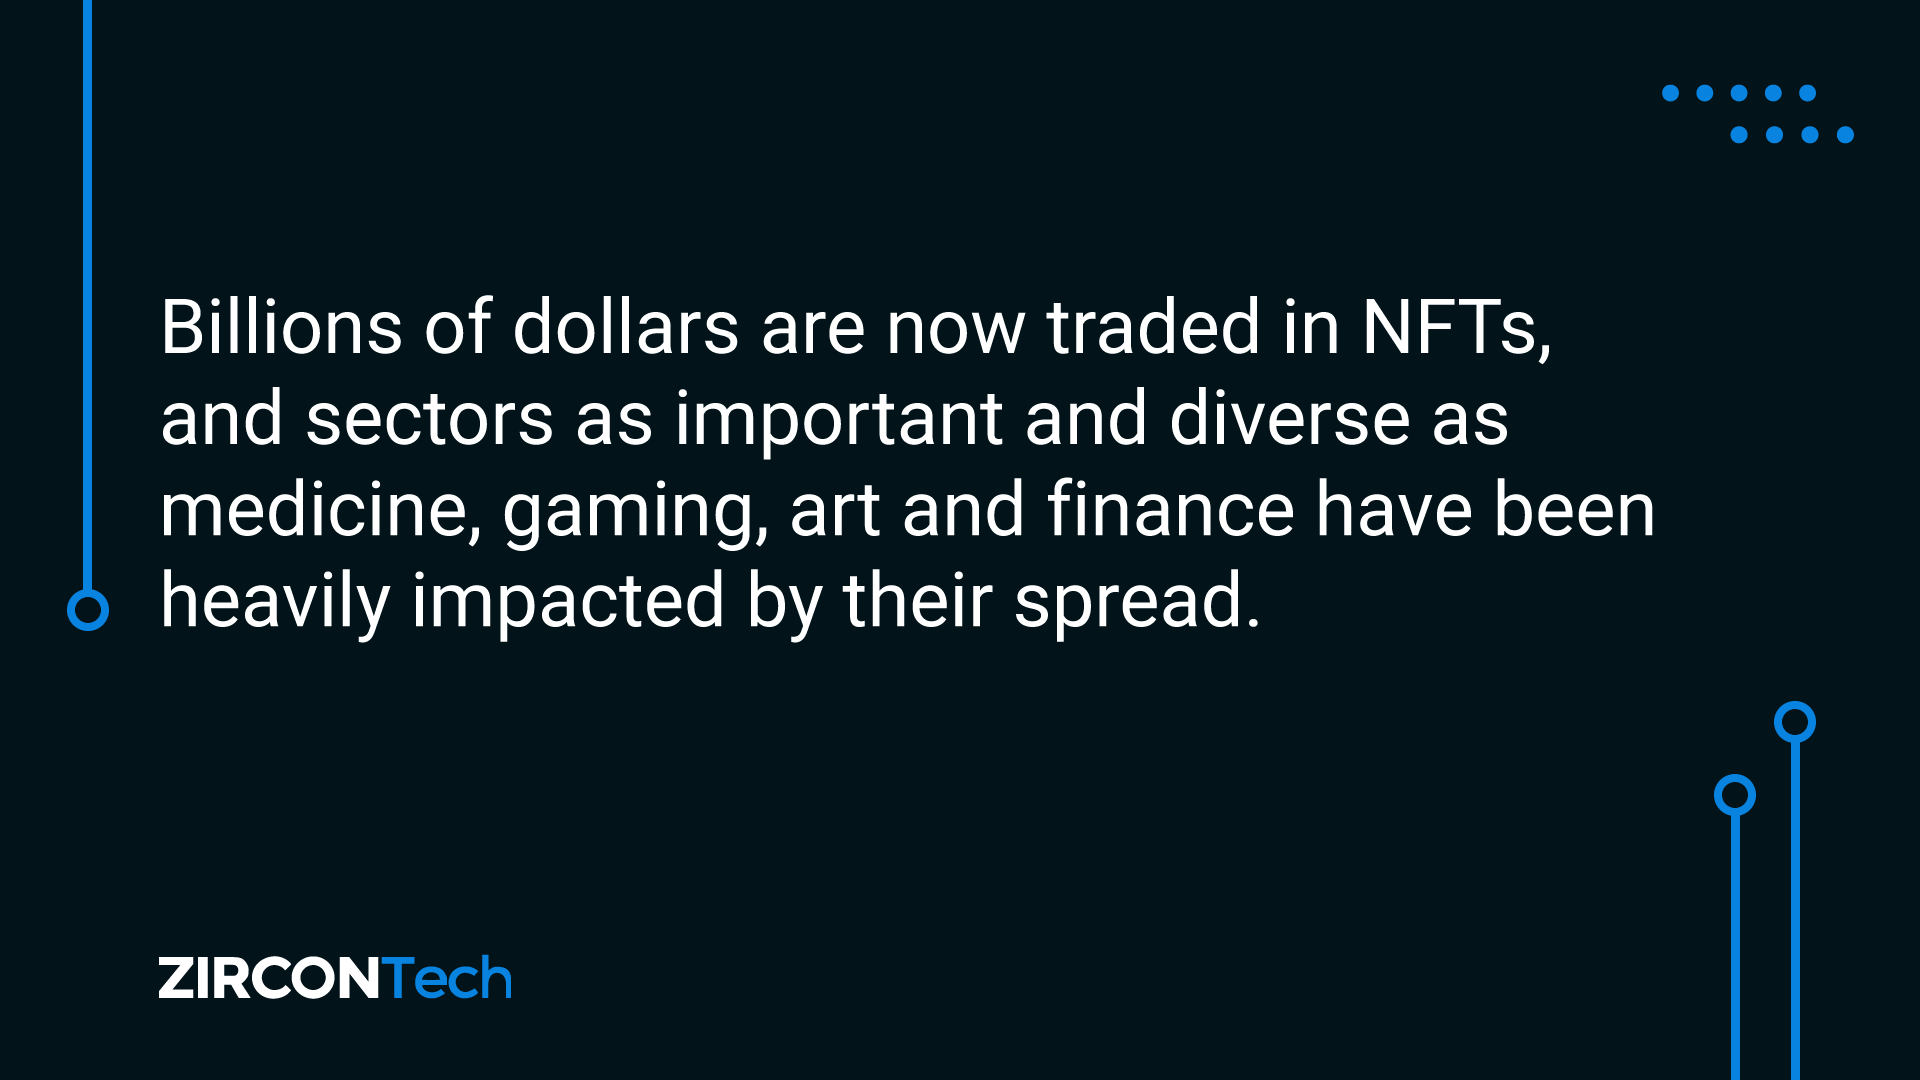 NFTs trading billions of dollars, impacting in medicine, gaming, art and finance